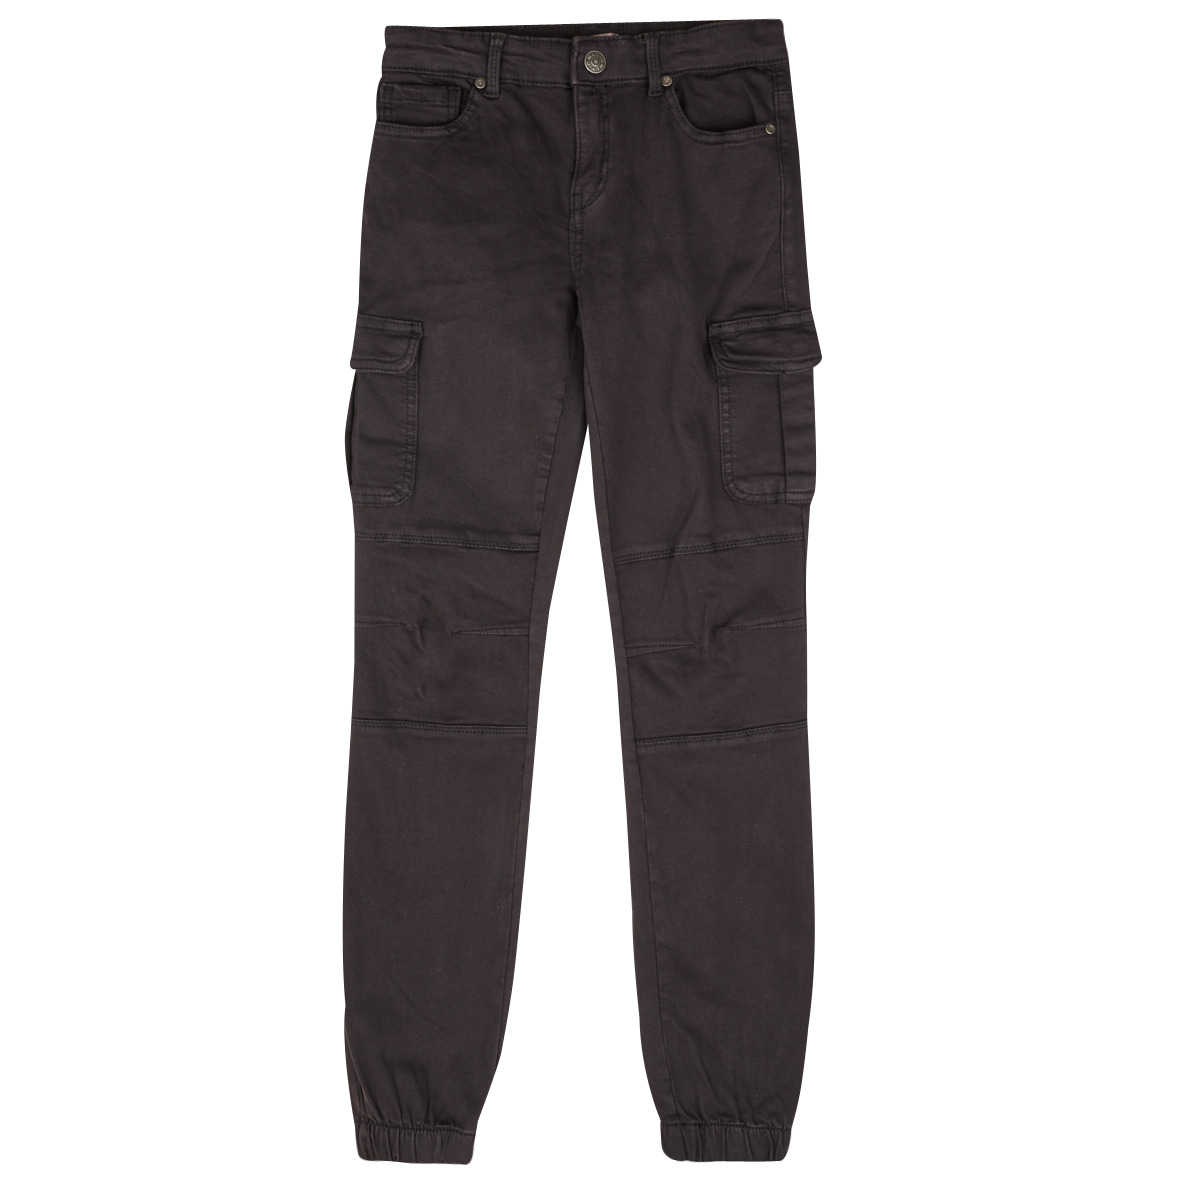 Only KOGMISSOURI Child NOOS trousers ! REG £ Black Delivery with Clothing Cargo CARGO Free Rubbersole.co.uk - - LIFE PNT